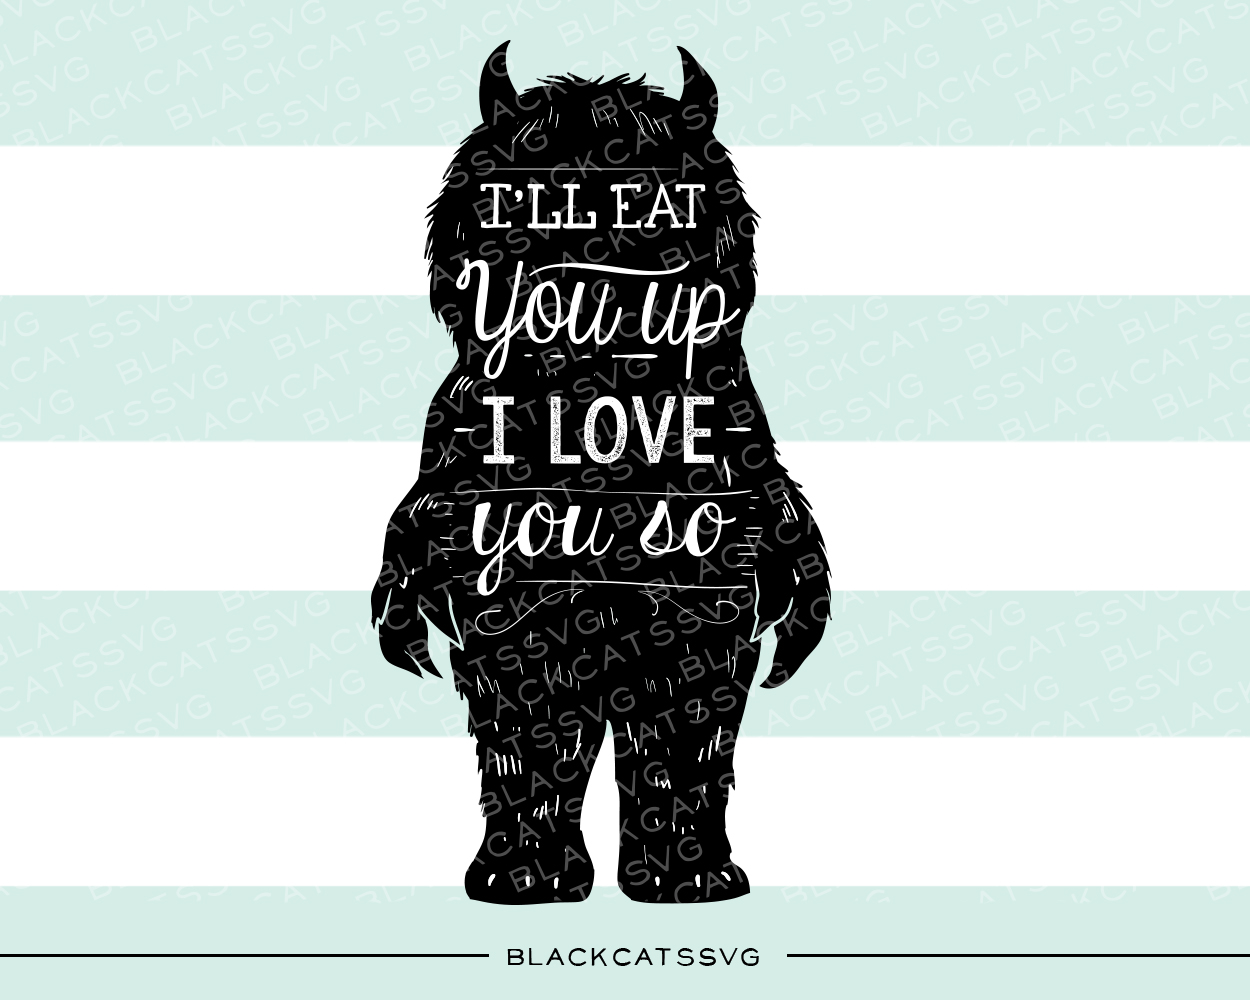 I'll Eat You Up - I Love You so Kids Craft Cut File By BlackCatsSVG